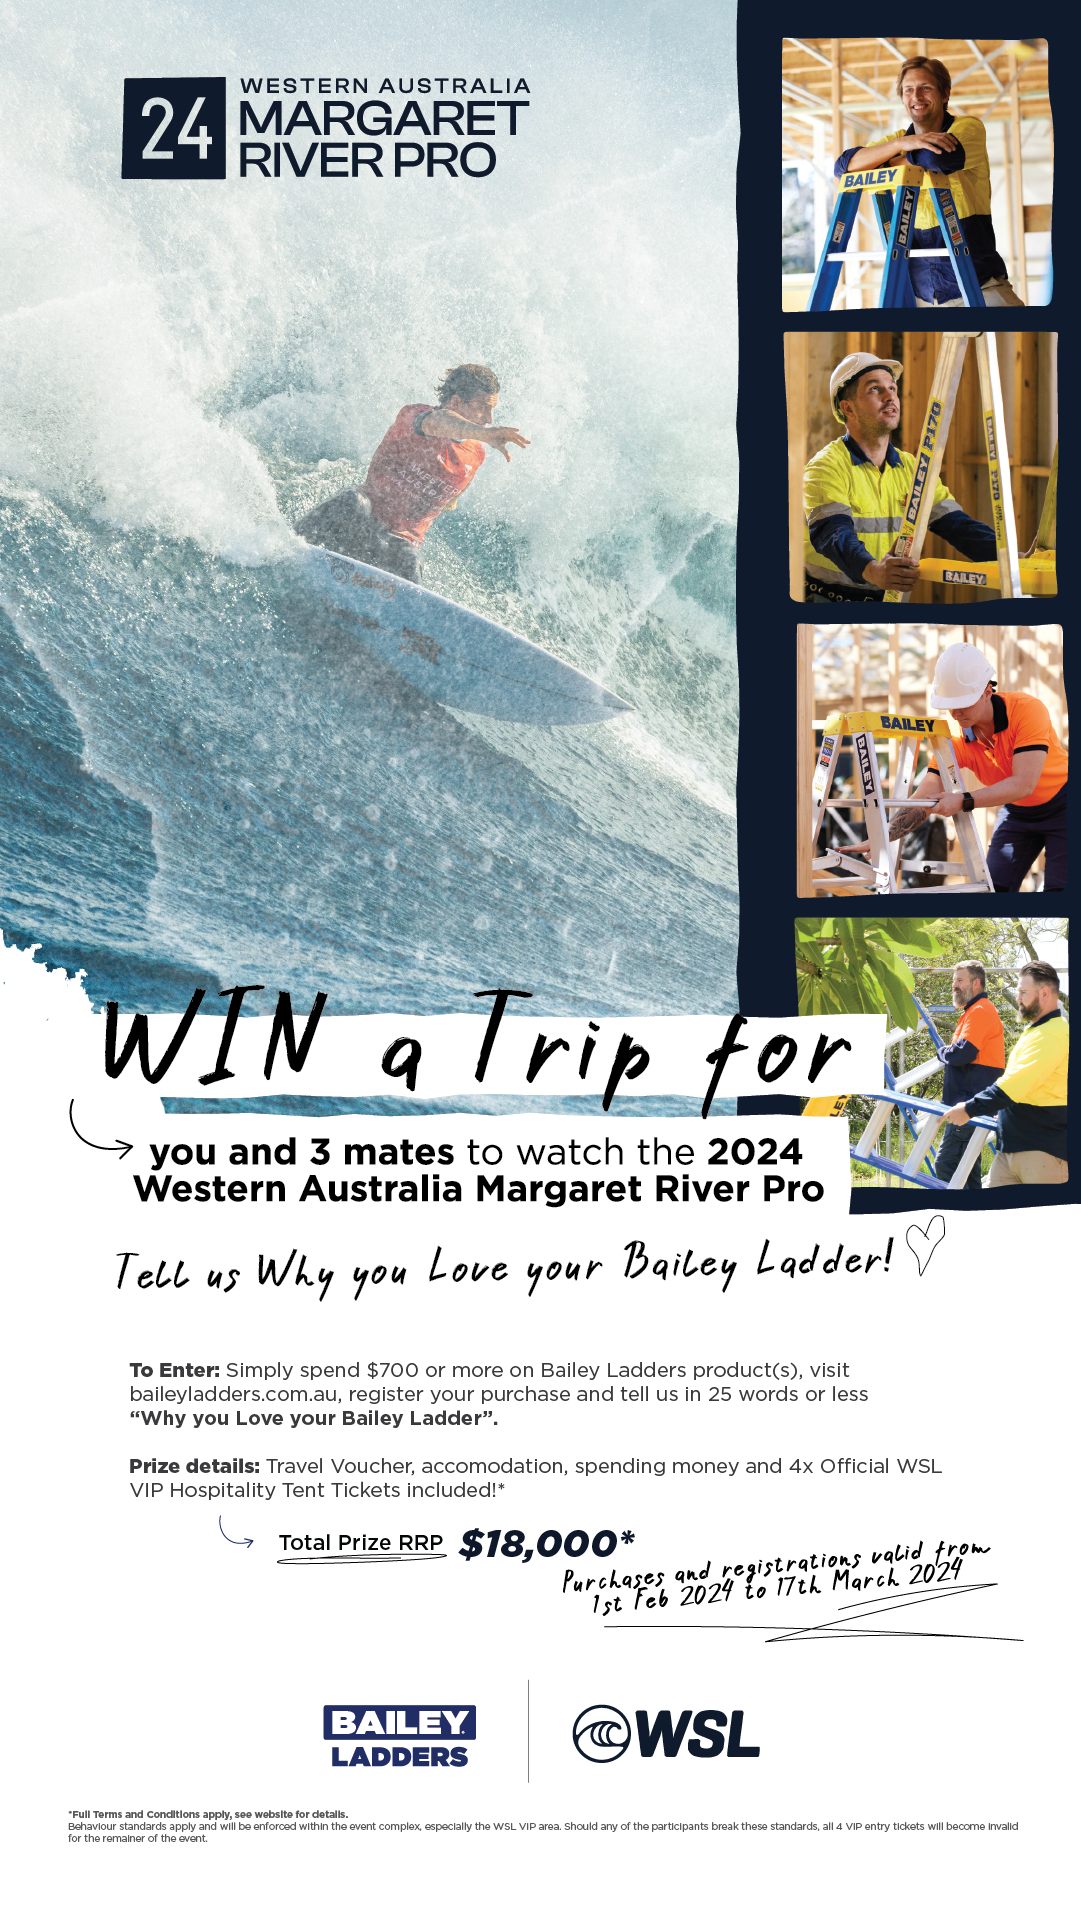 Win a trip to Western Australia's Margaret River Pro with Bailey & WSL